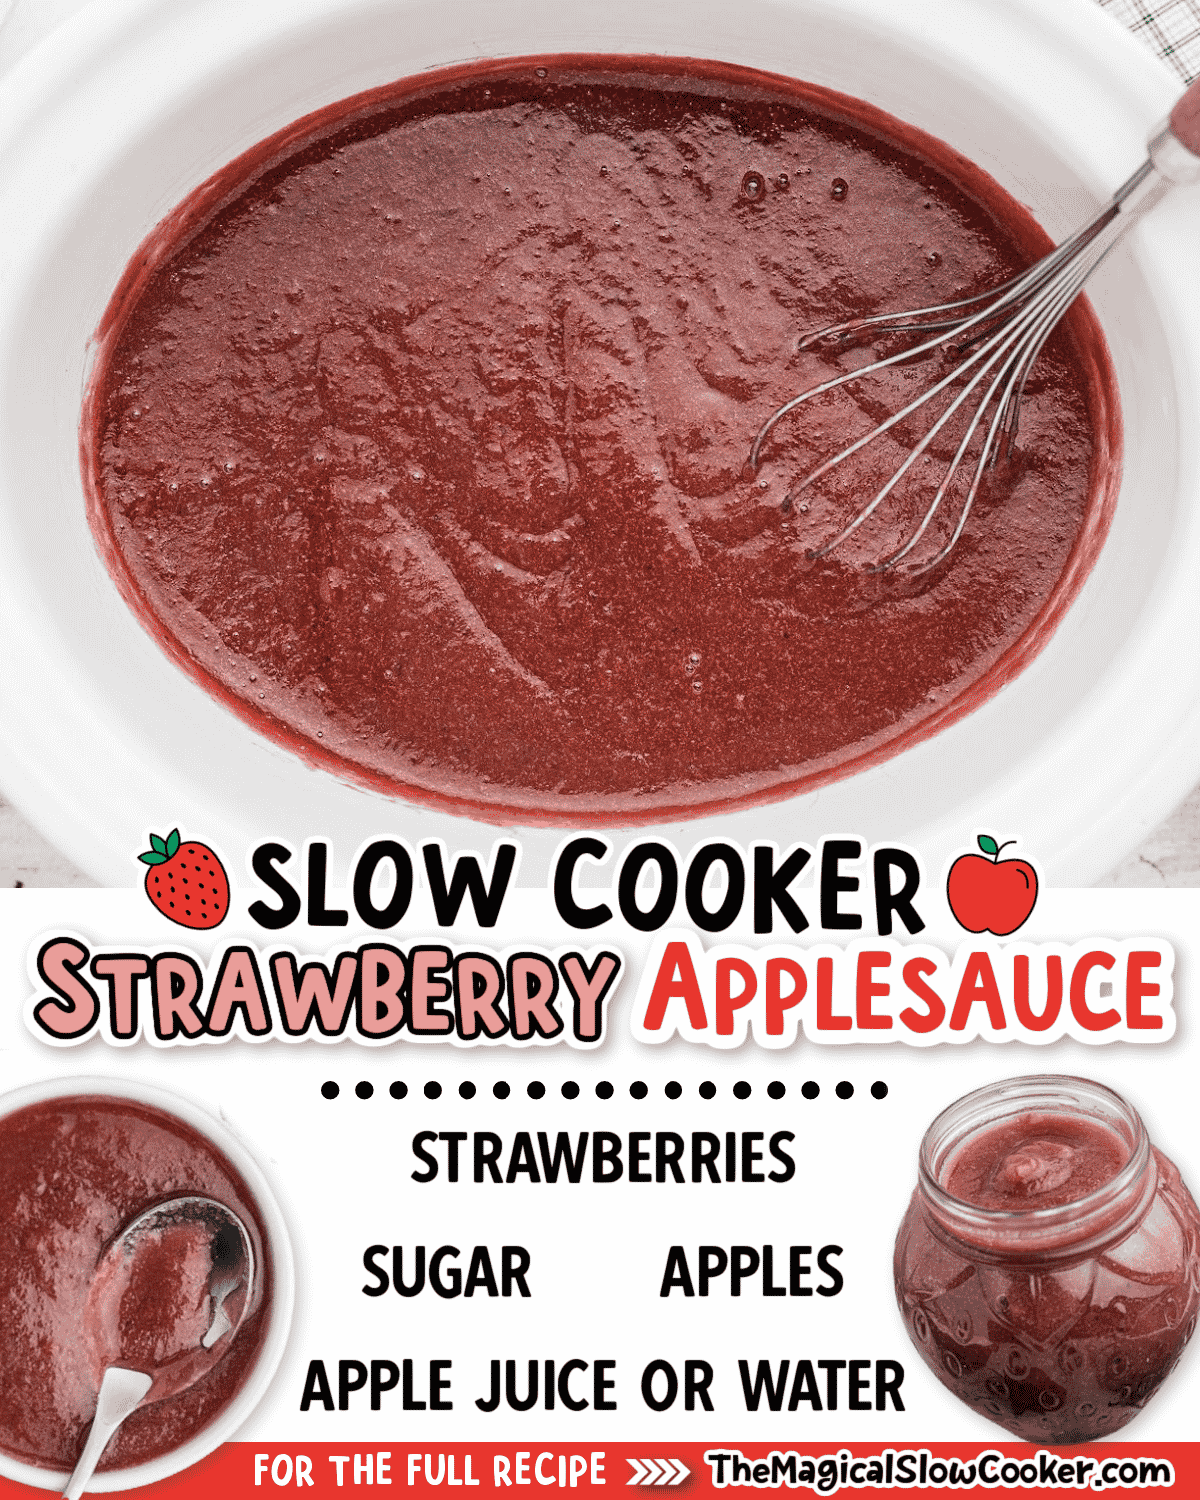 strawberry applesauce ingredients with text of ingredients.